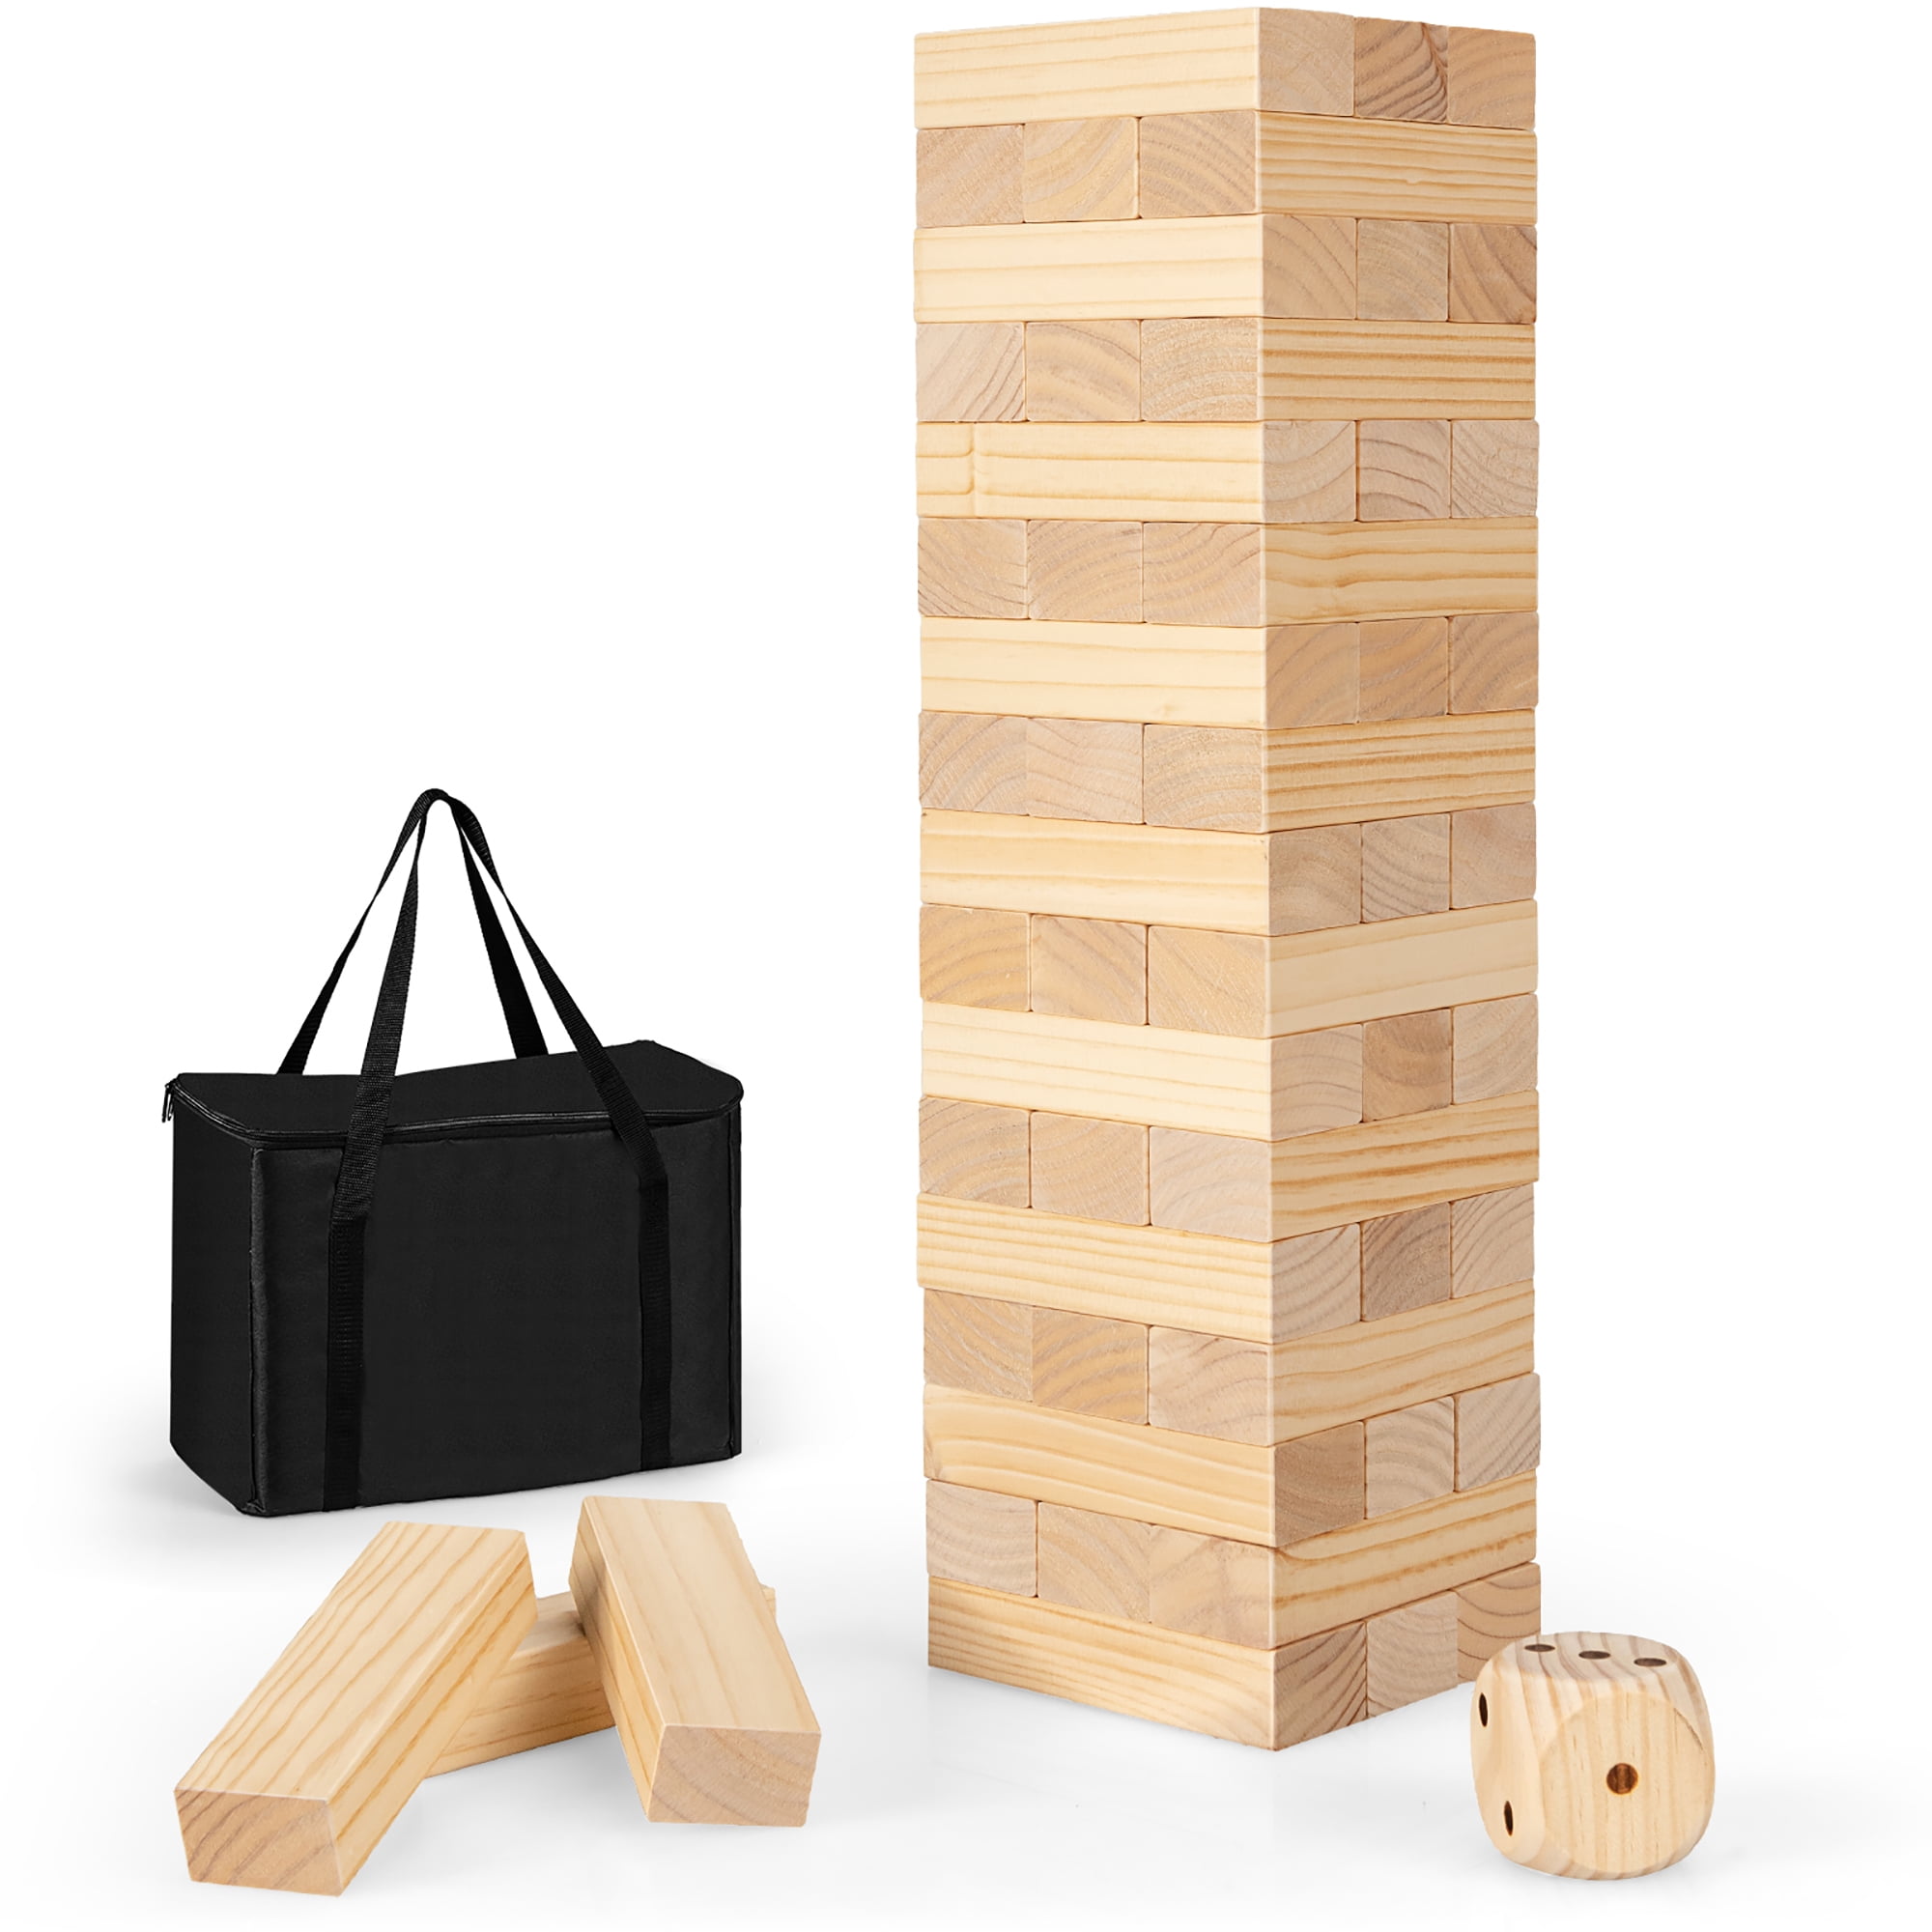 Pompotops Giant Tumbling Timber Toy - JR. Wooden Blocks Floor Game for Kids  and Adults, 48 Pieces, Premium Wood, Carry Bag feet While Playing, Life  Size Yard Tower Game 